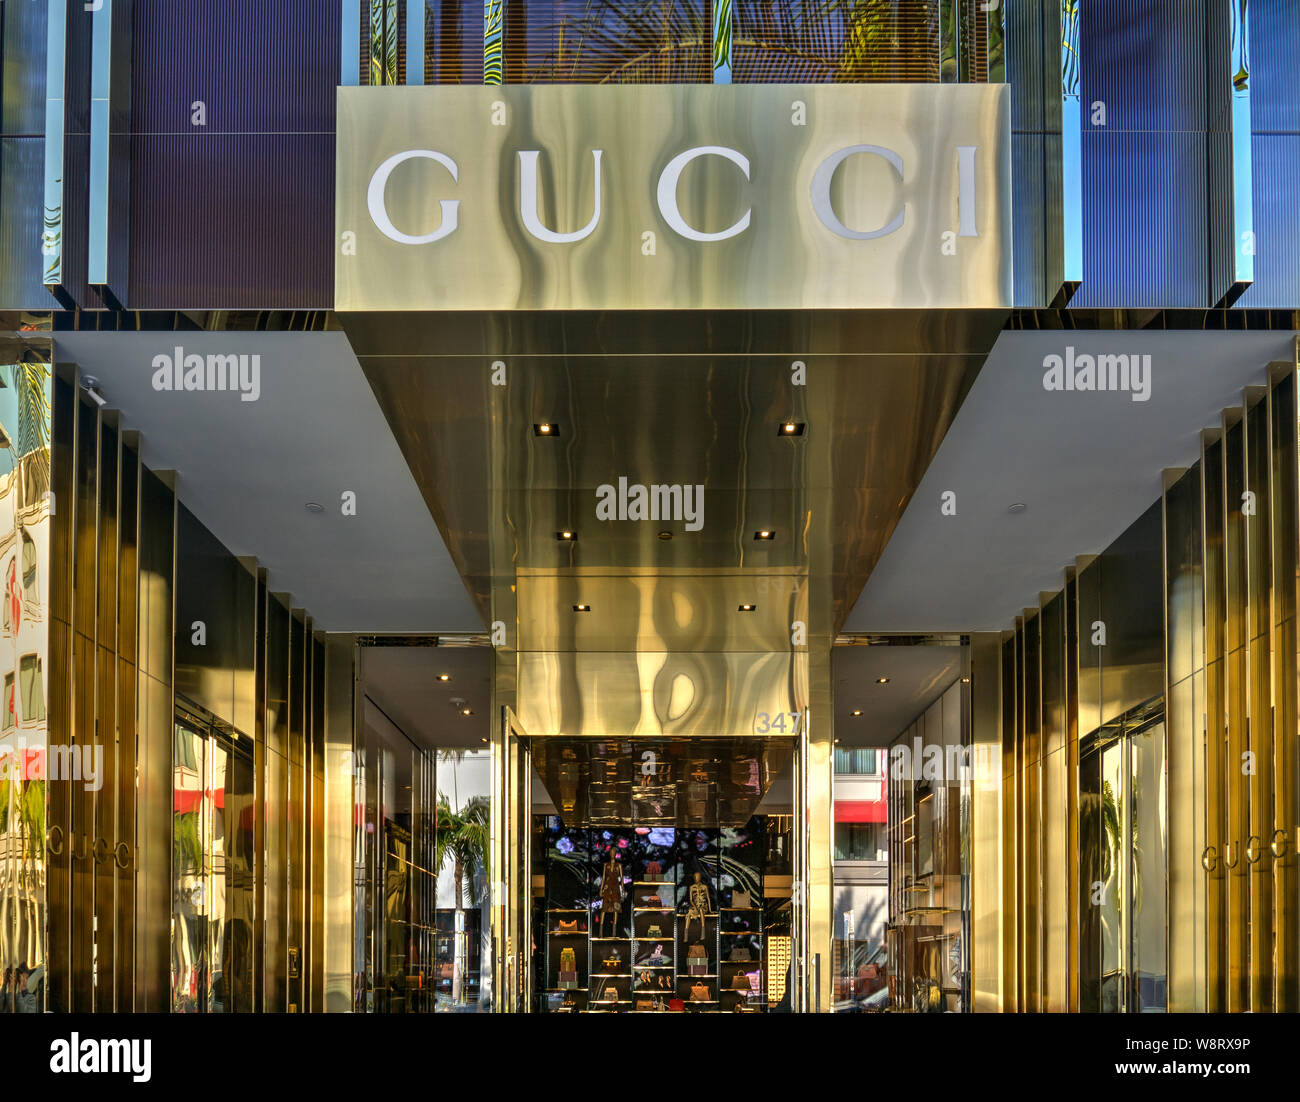 BEVERLY HILLS, CA/USA - JANUARY 3, 2015: Gucci retail store exterior. Gucci  is an Italian fashion and leather goods brand with retail stores throughou  Stock Photo - Alamy